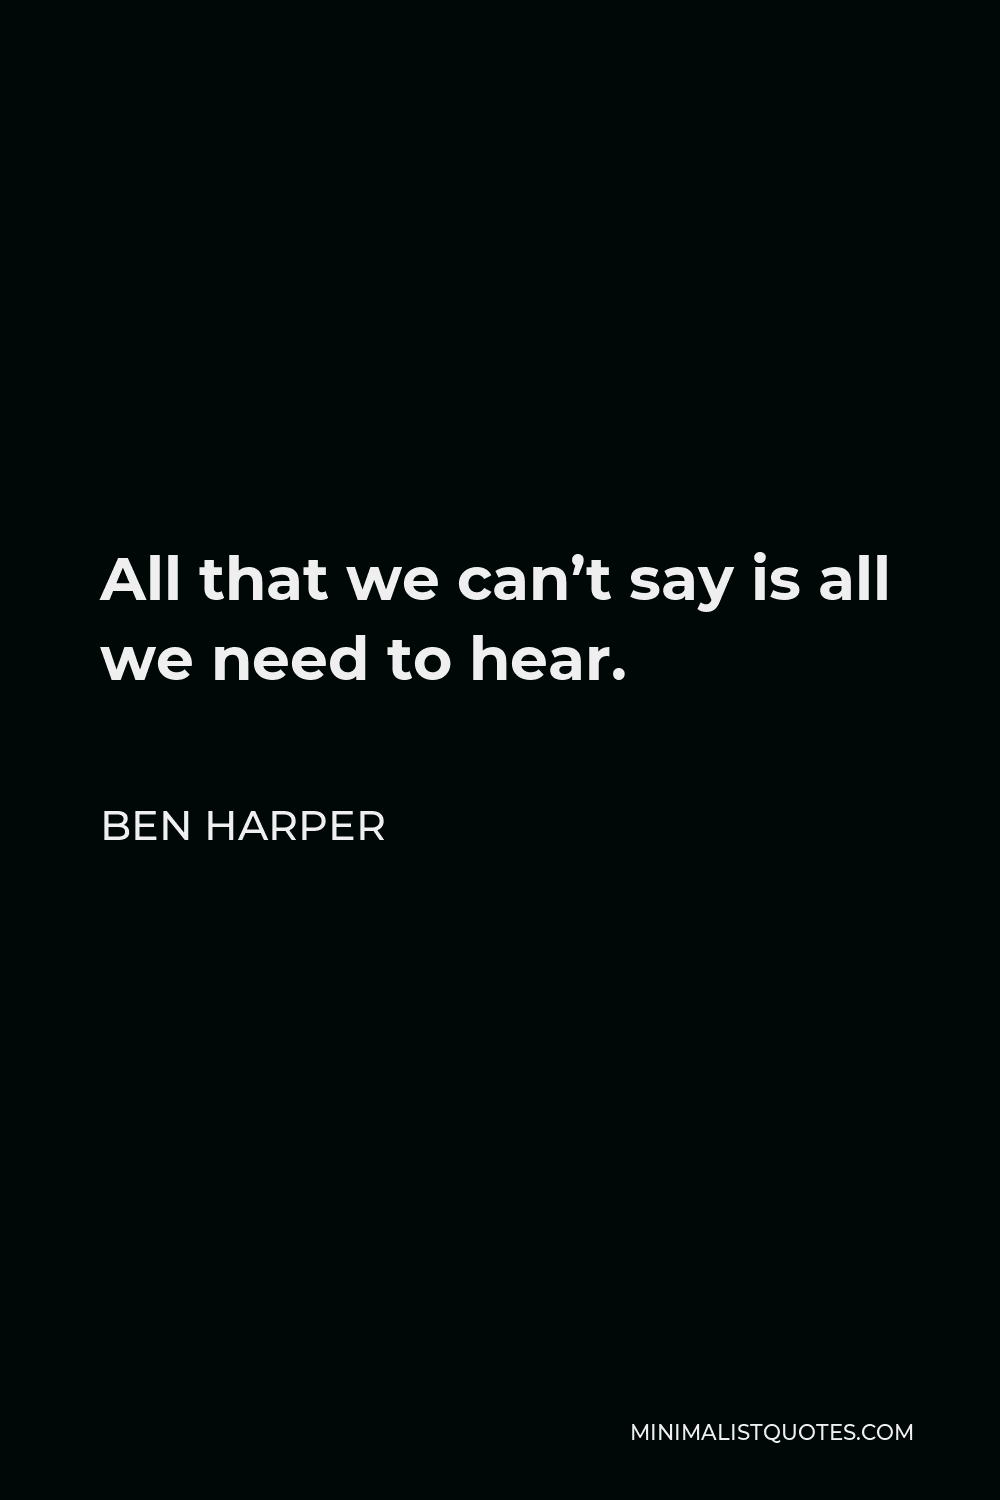 Ben Harper Quote - All that we can’t say is all we need to hear.